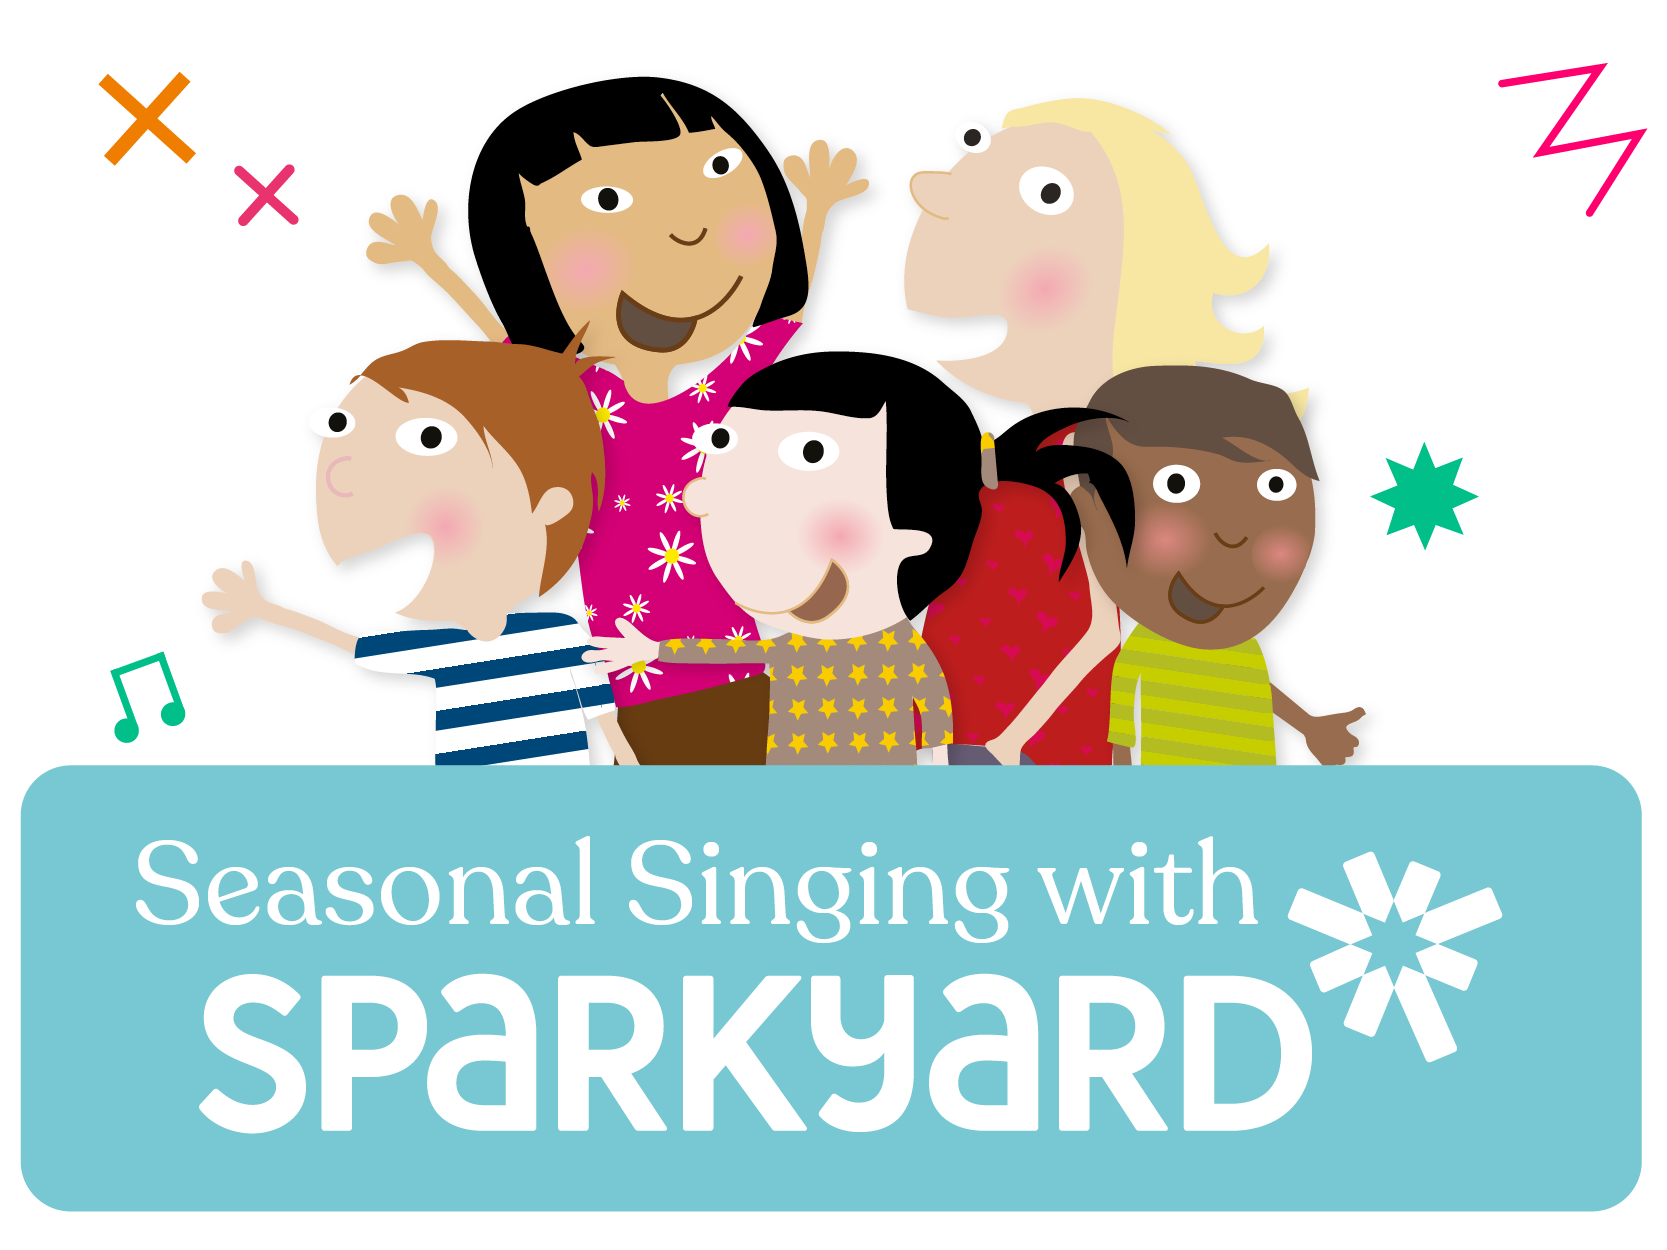 Seaonal Singing With Sparkyard Promotional Image